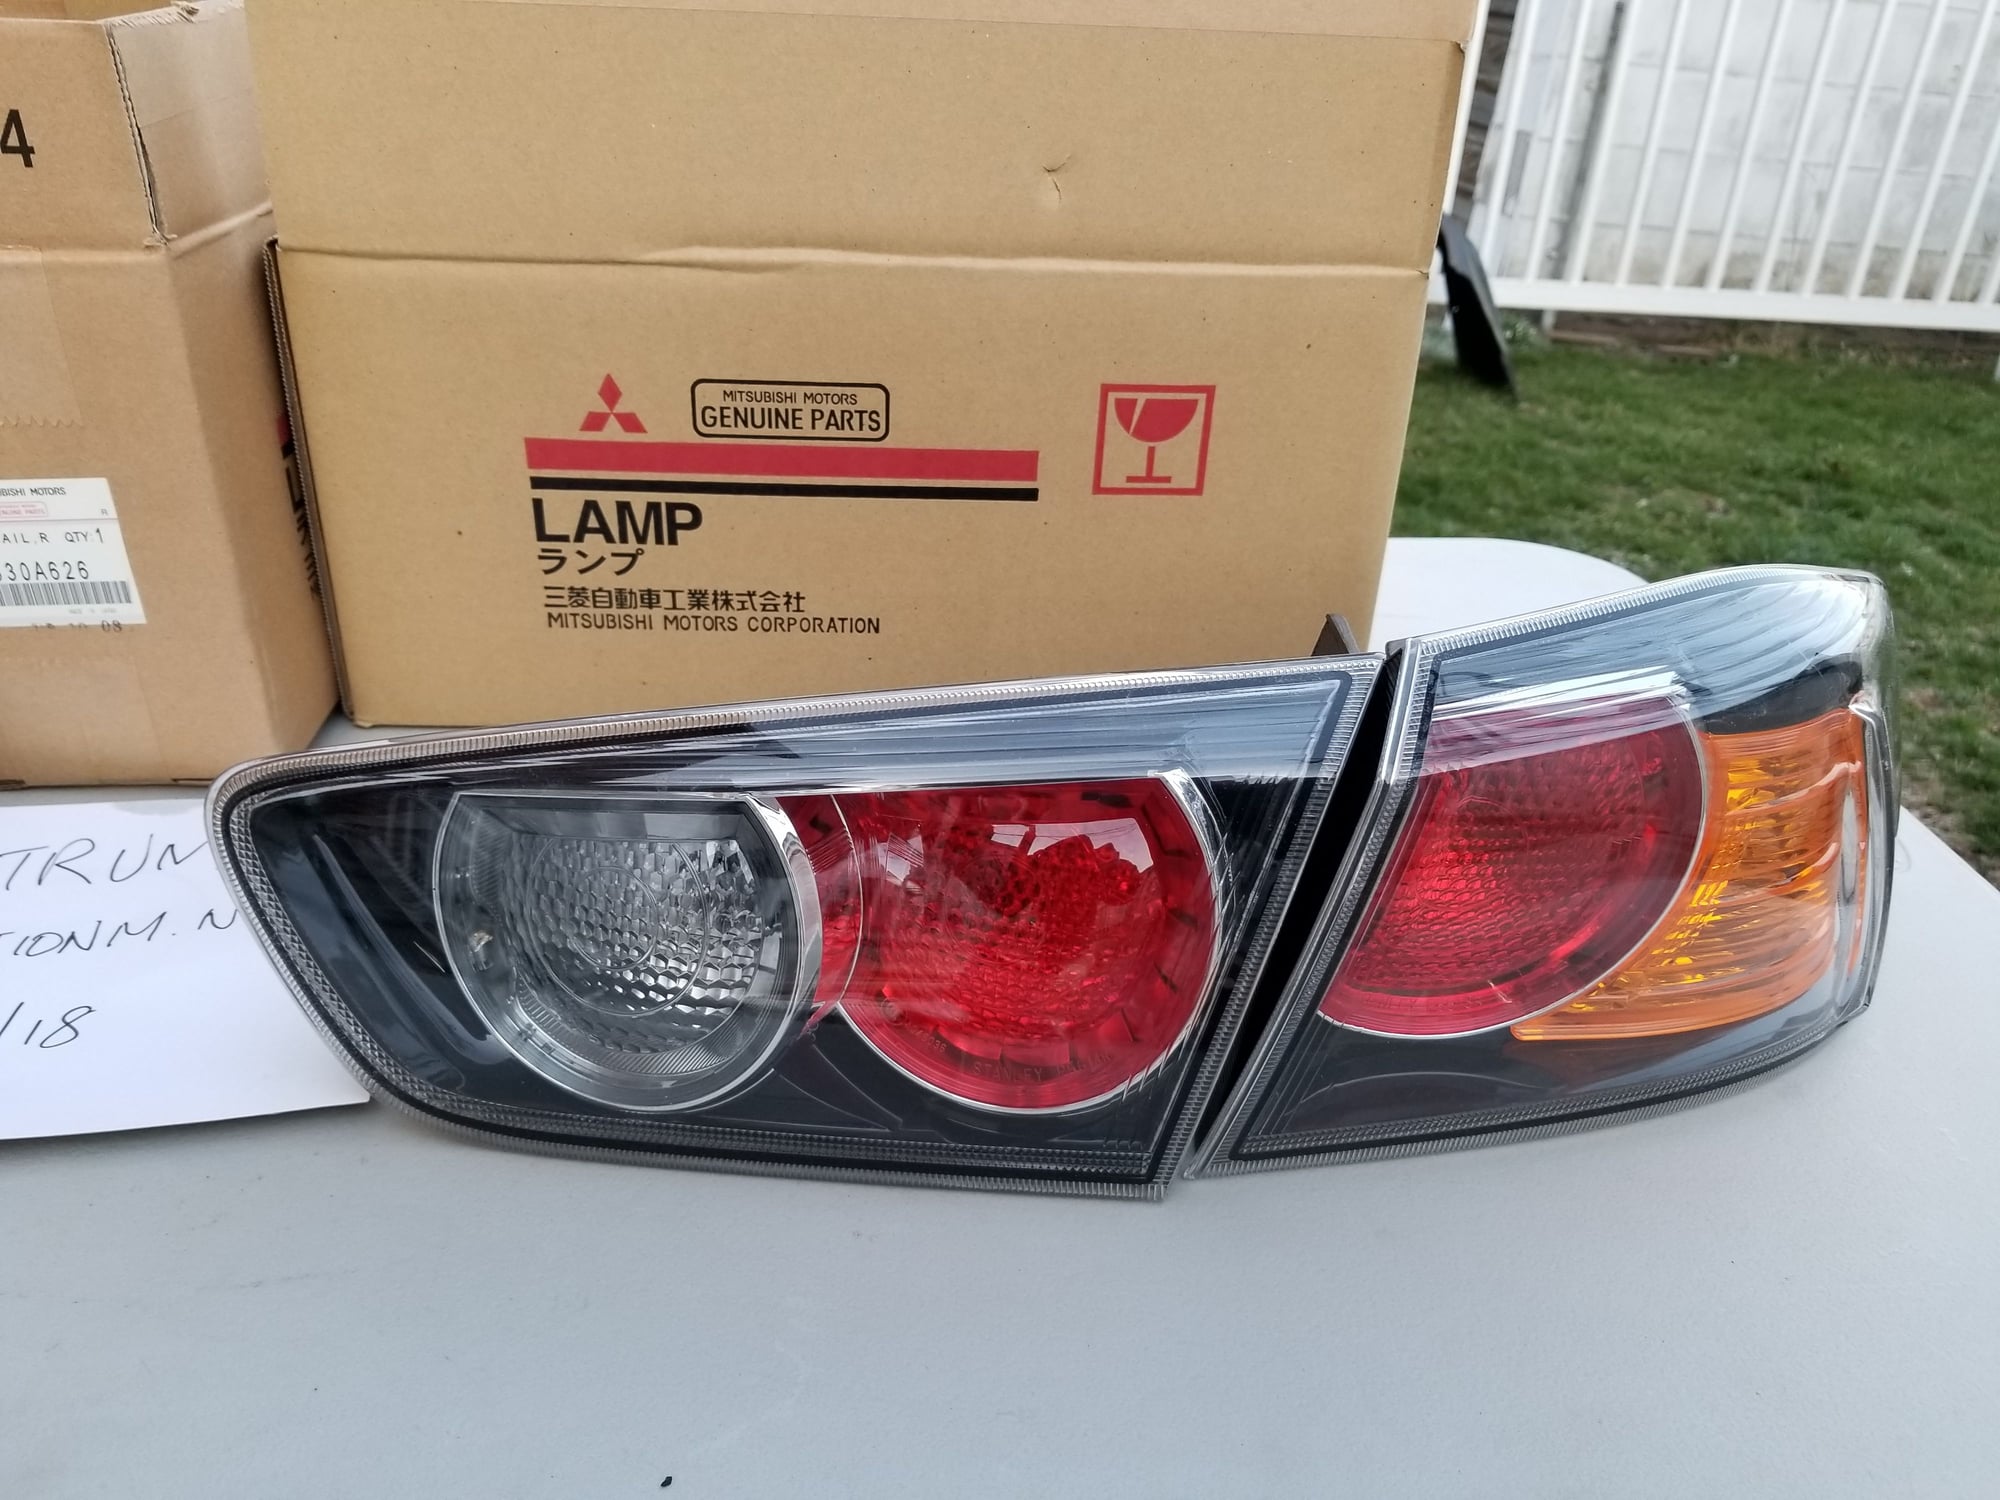 Exterior Body Parts - FS: Mitsubishi OEM Ralliart tail lights/ Brand New set of OEM Rear trunk emblems - Used - 2008 to 2015 Mitsubishi Lancer Evolution - Brooklyn, NY 11211, United States